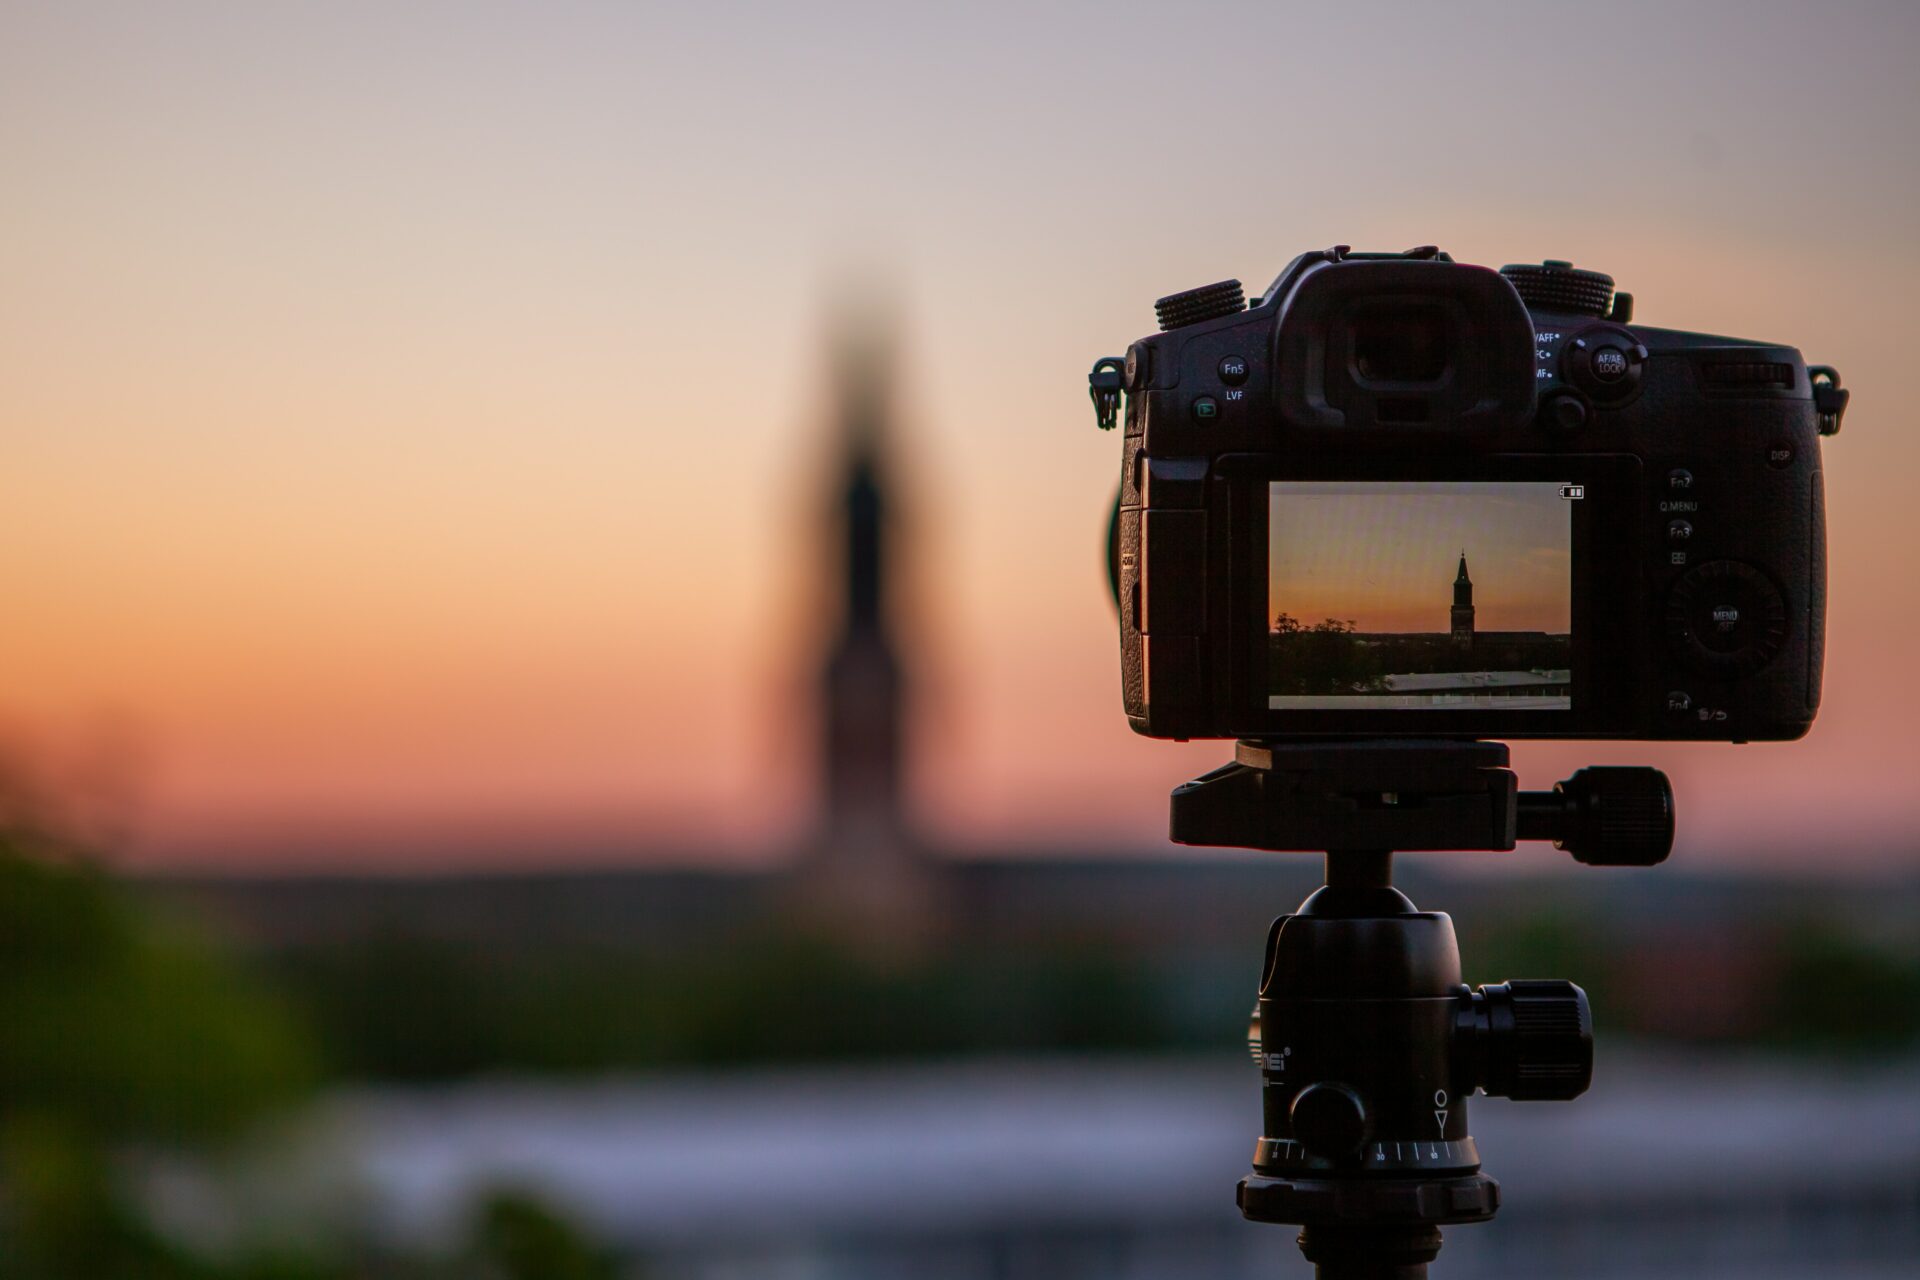 Camera taking a photo of a sunset and tall building